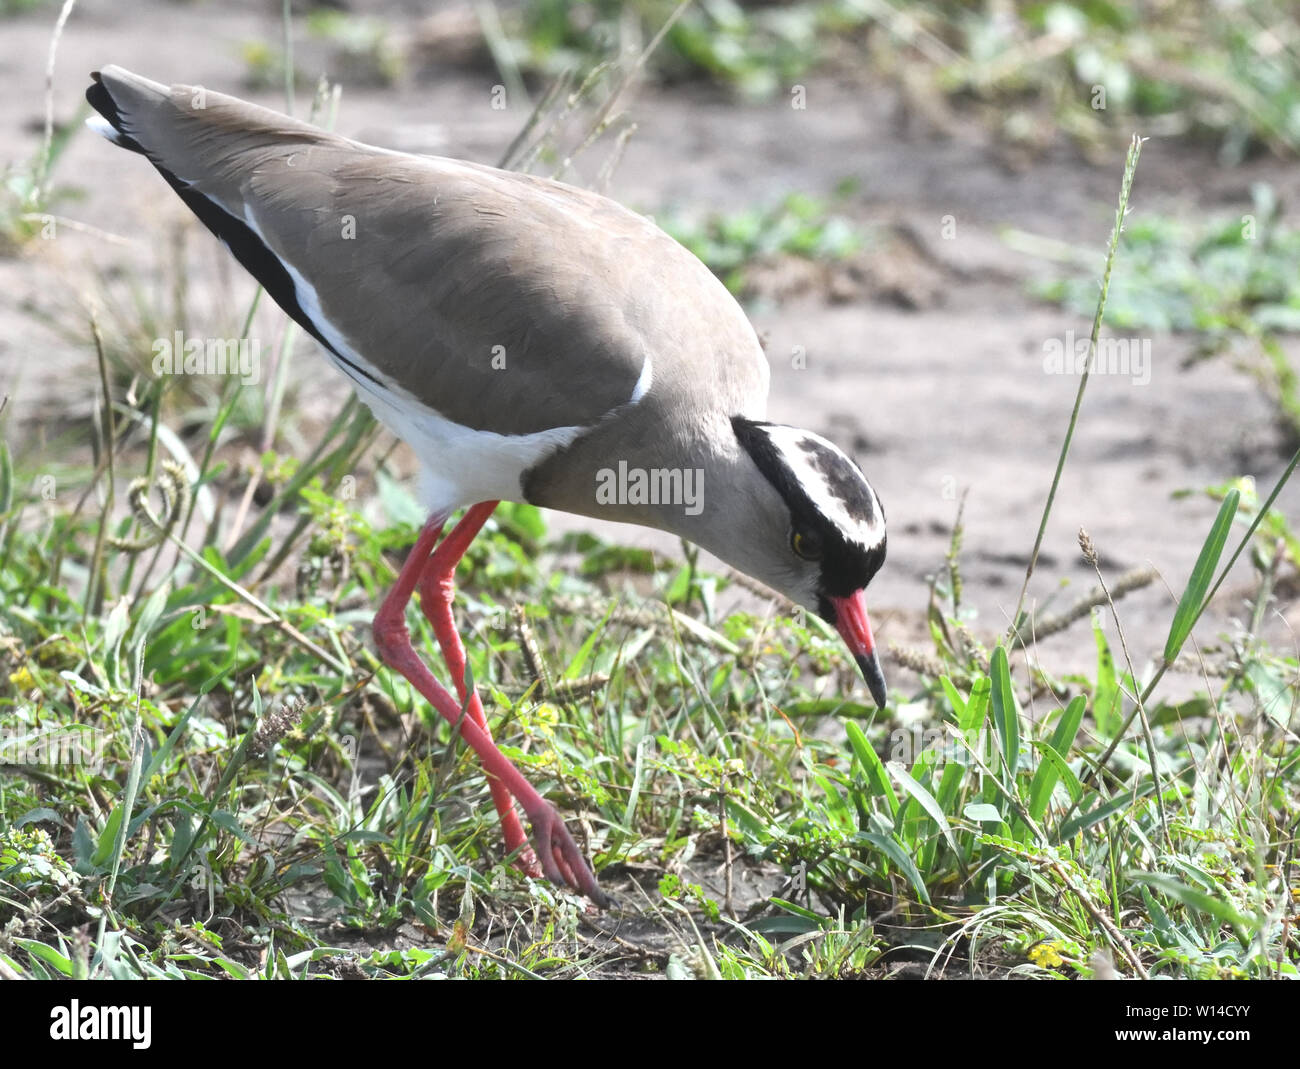 A crowned lapwing (Vanellus coronatus) or crowned plover searches for food in sparse grass. Queen Elizabeth National Park, Uganda. Stock Photo